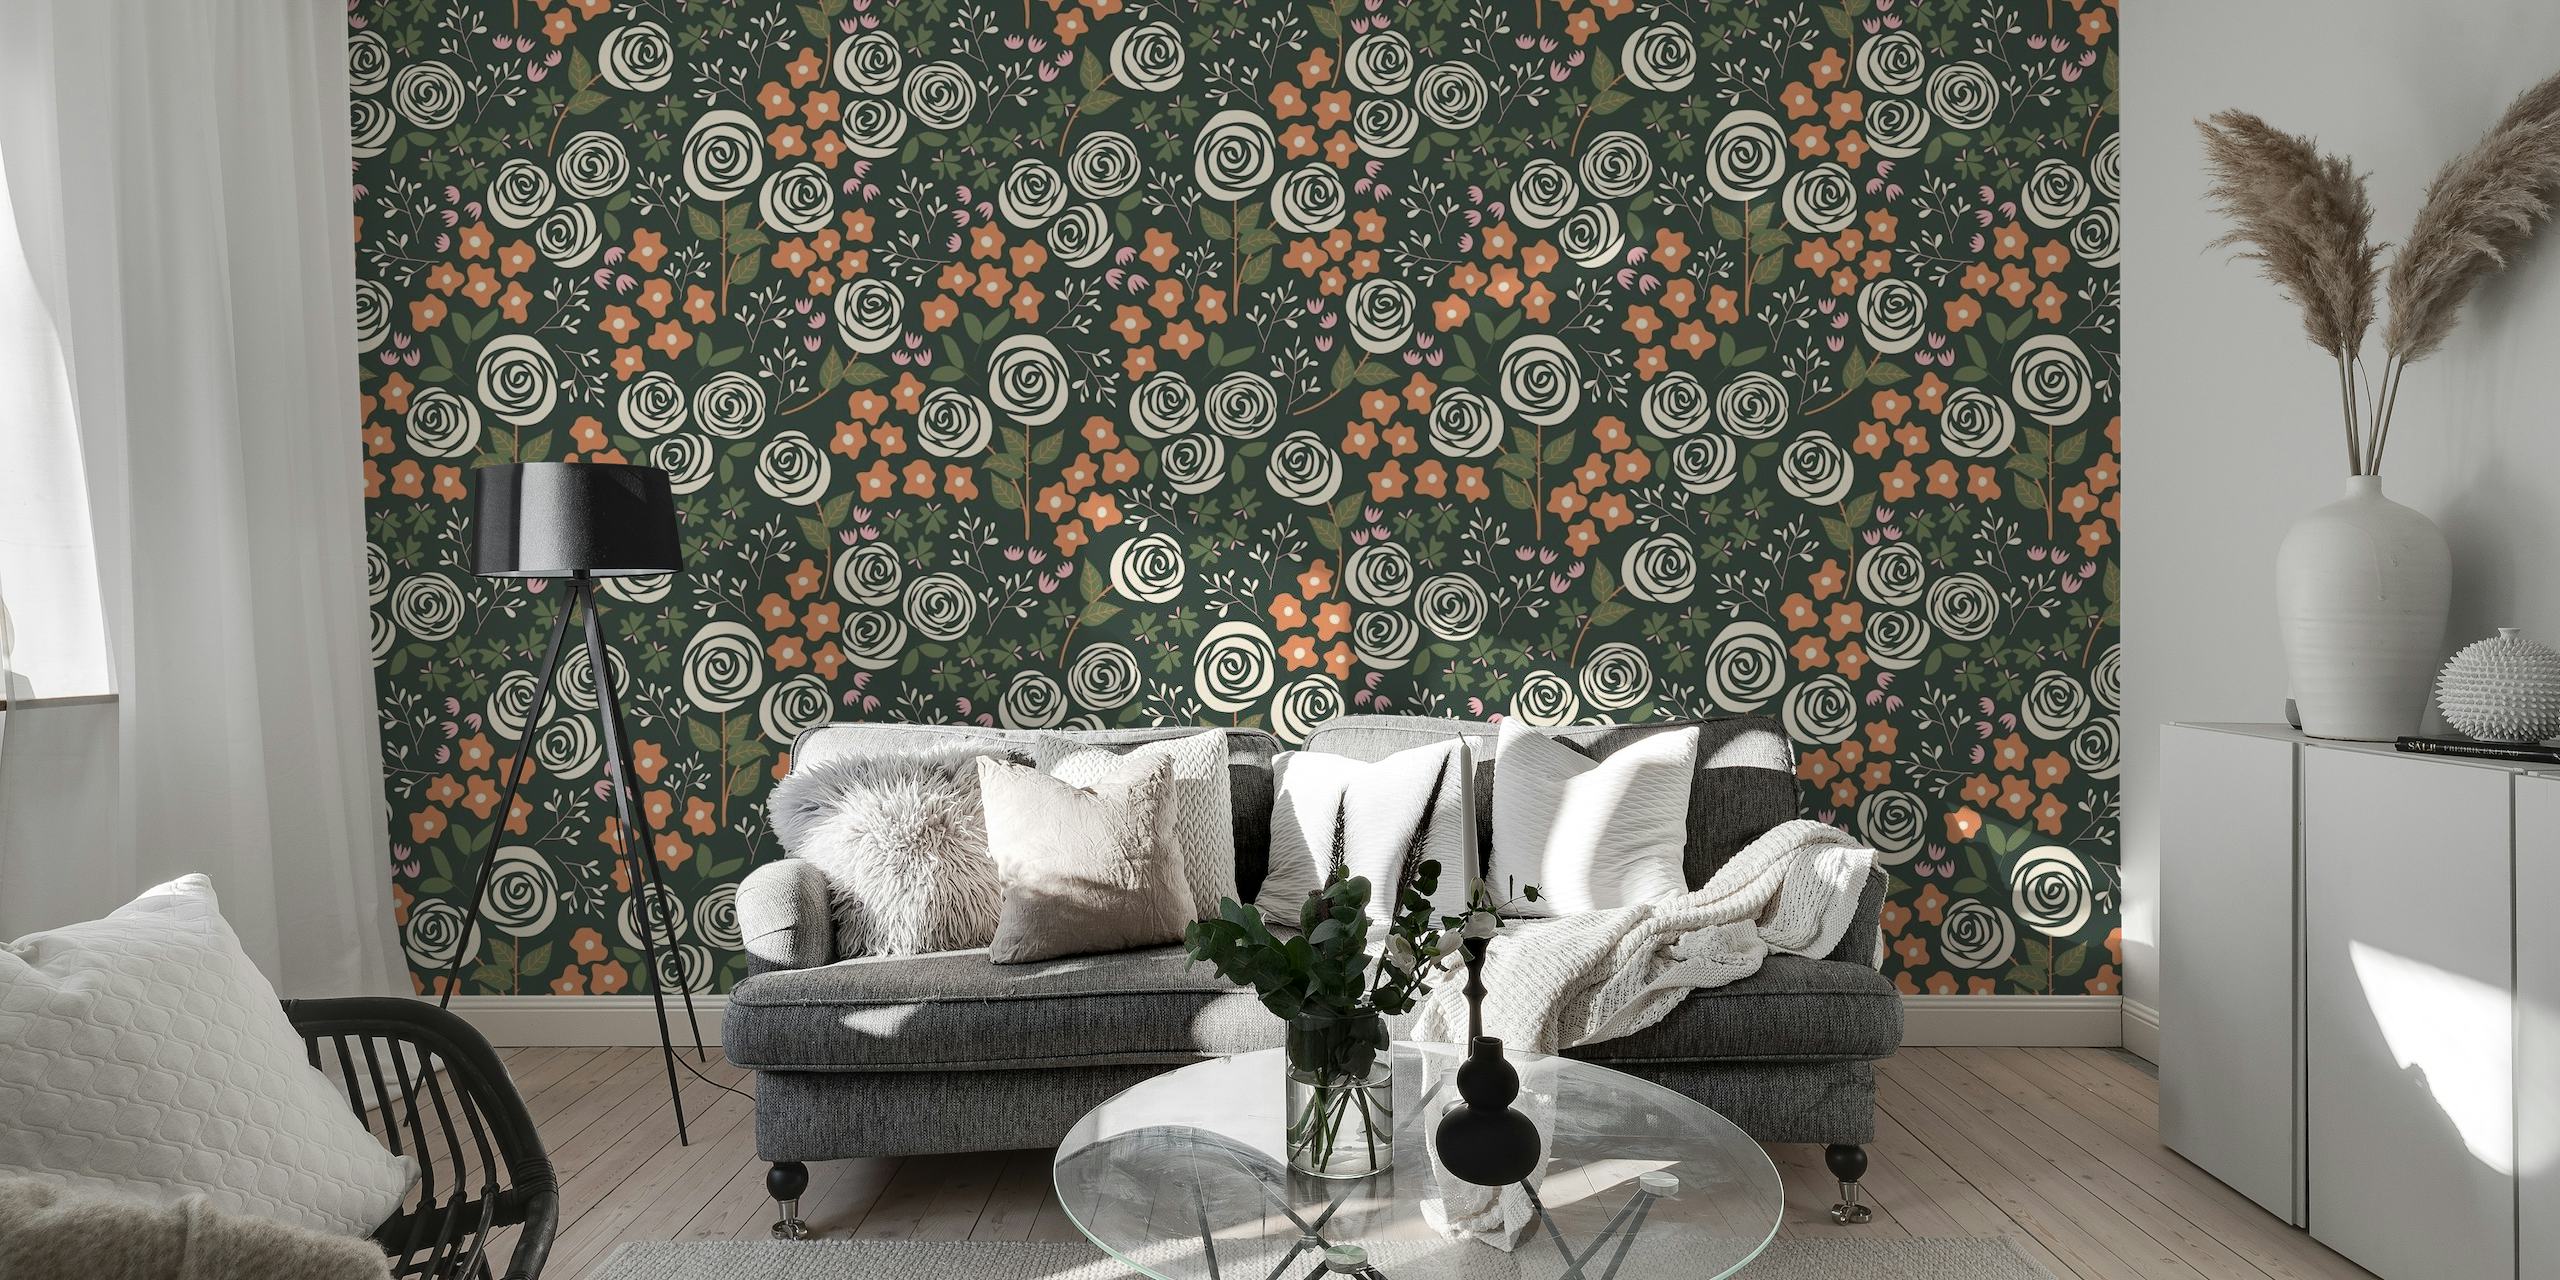 Midnight Rose Garden wall mural with muted greys and touches of rose and copper